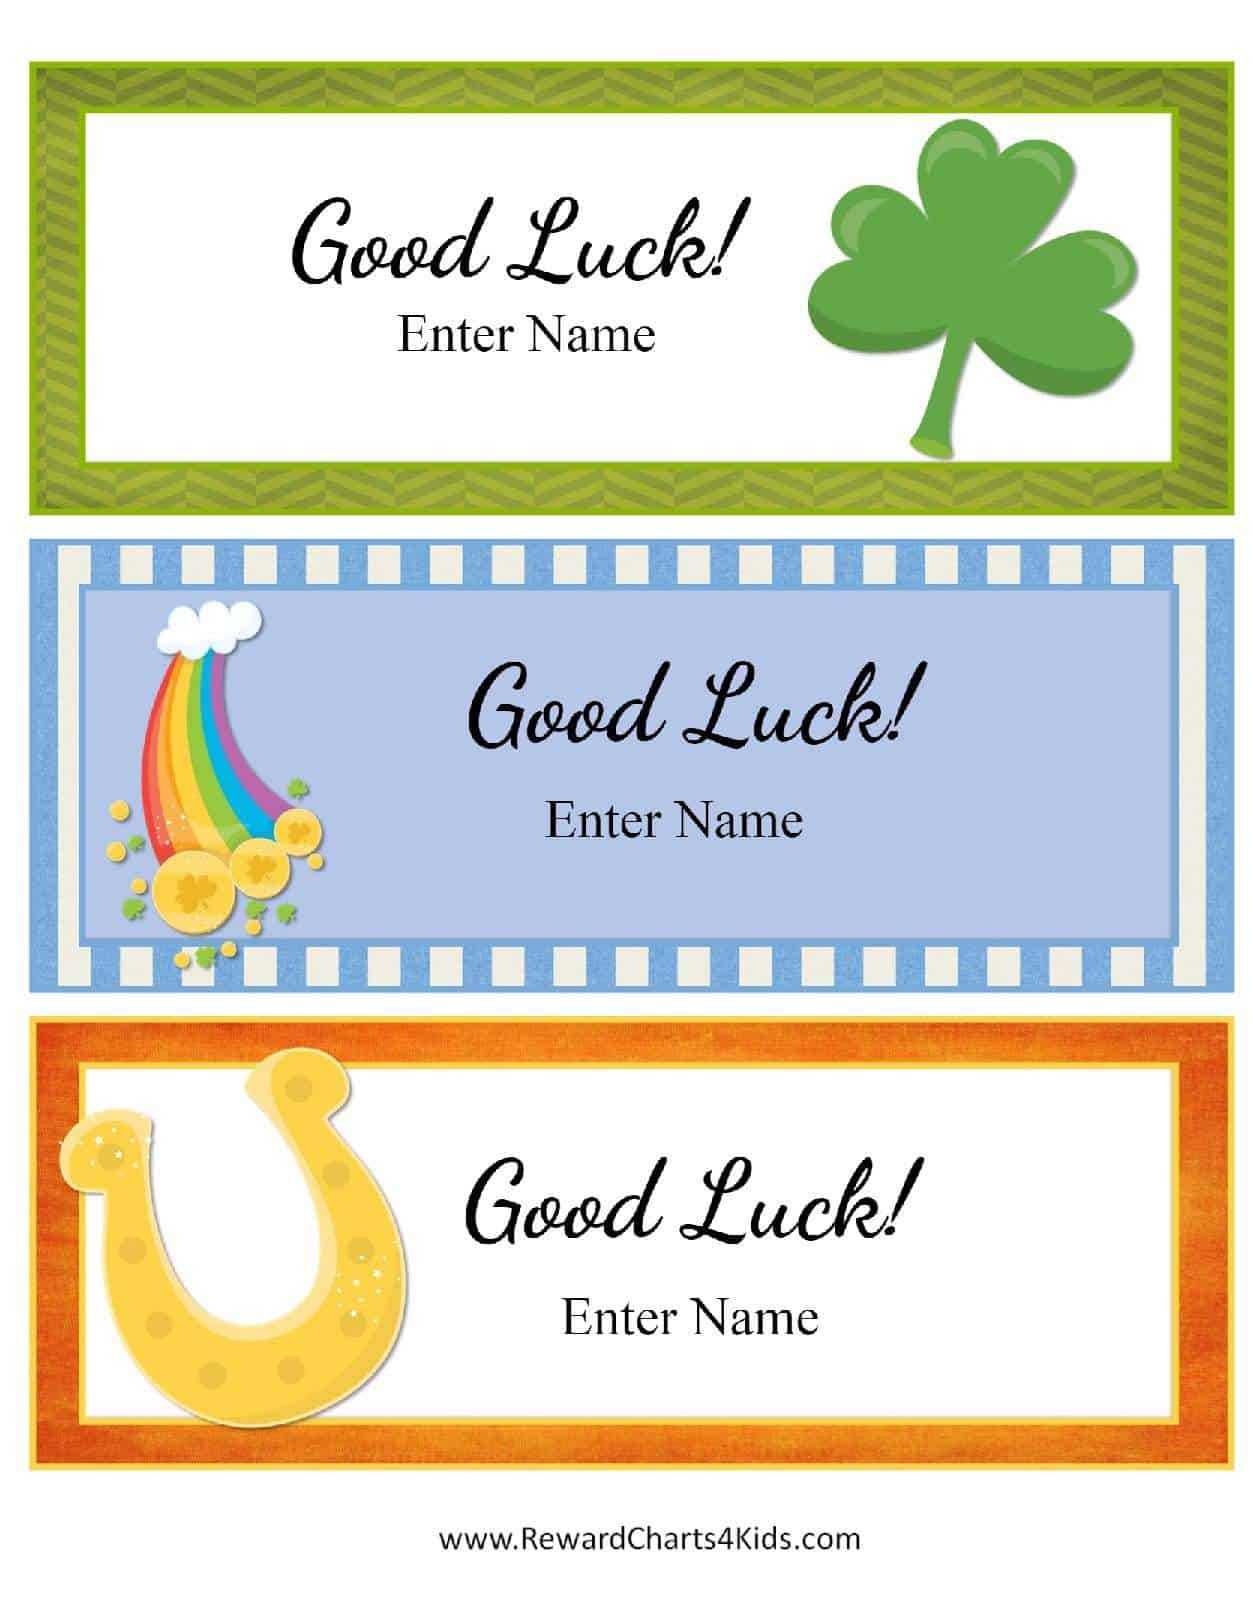 Free Good Luck Cards For Kids | Customize Online & Print At Home Inside Good Luck Card Template